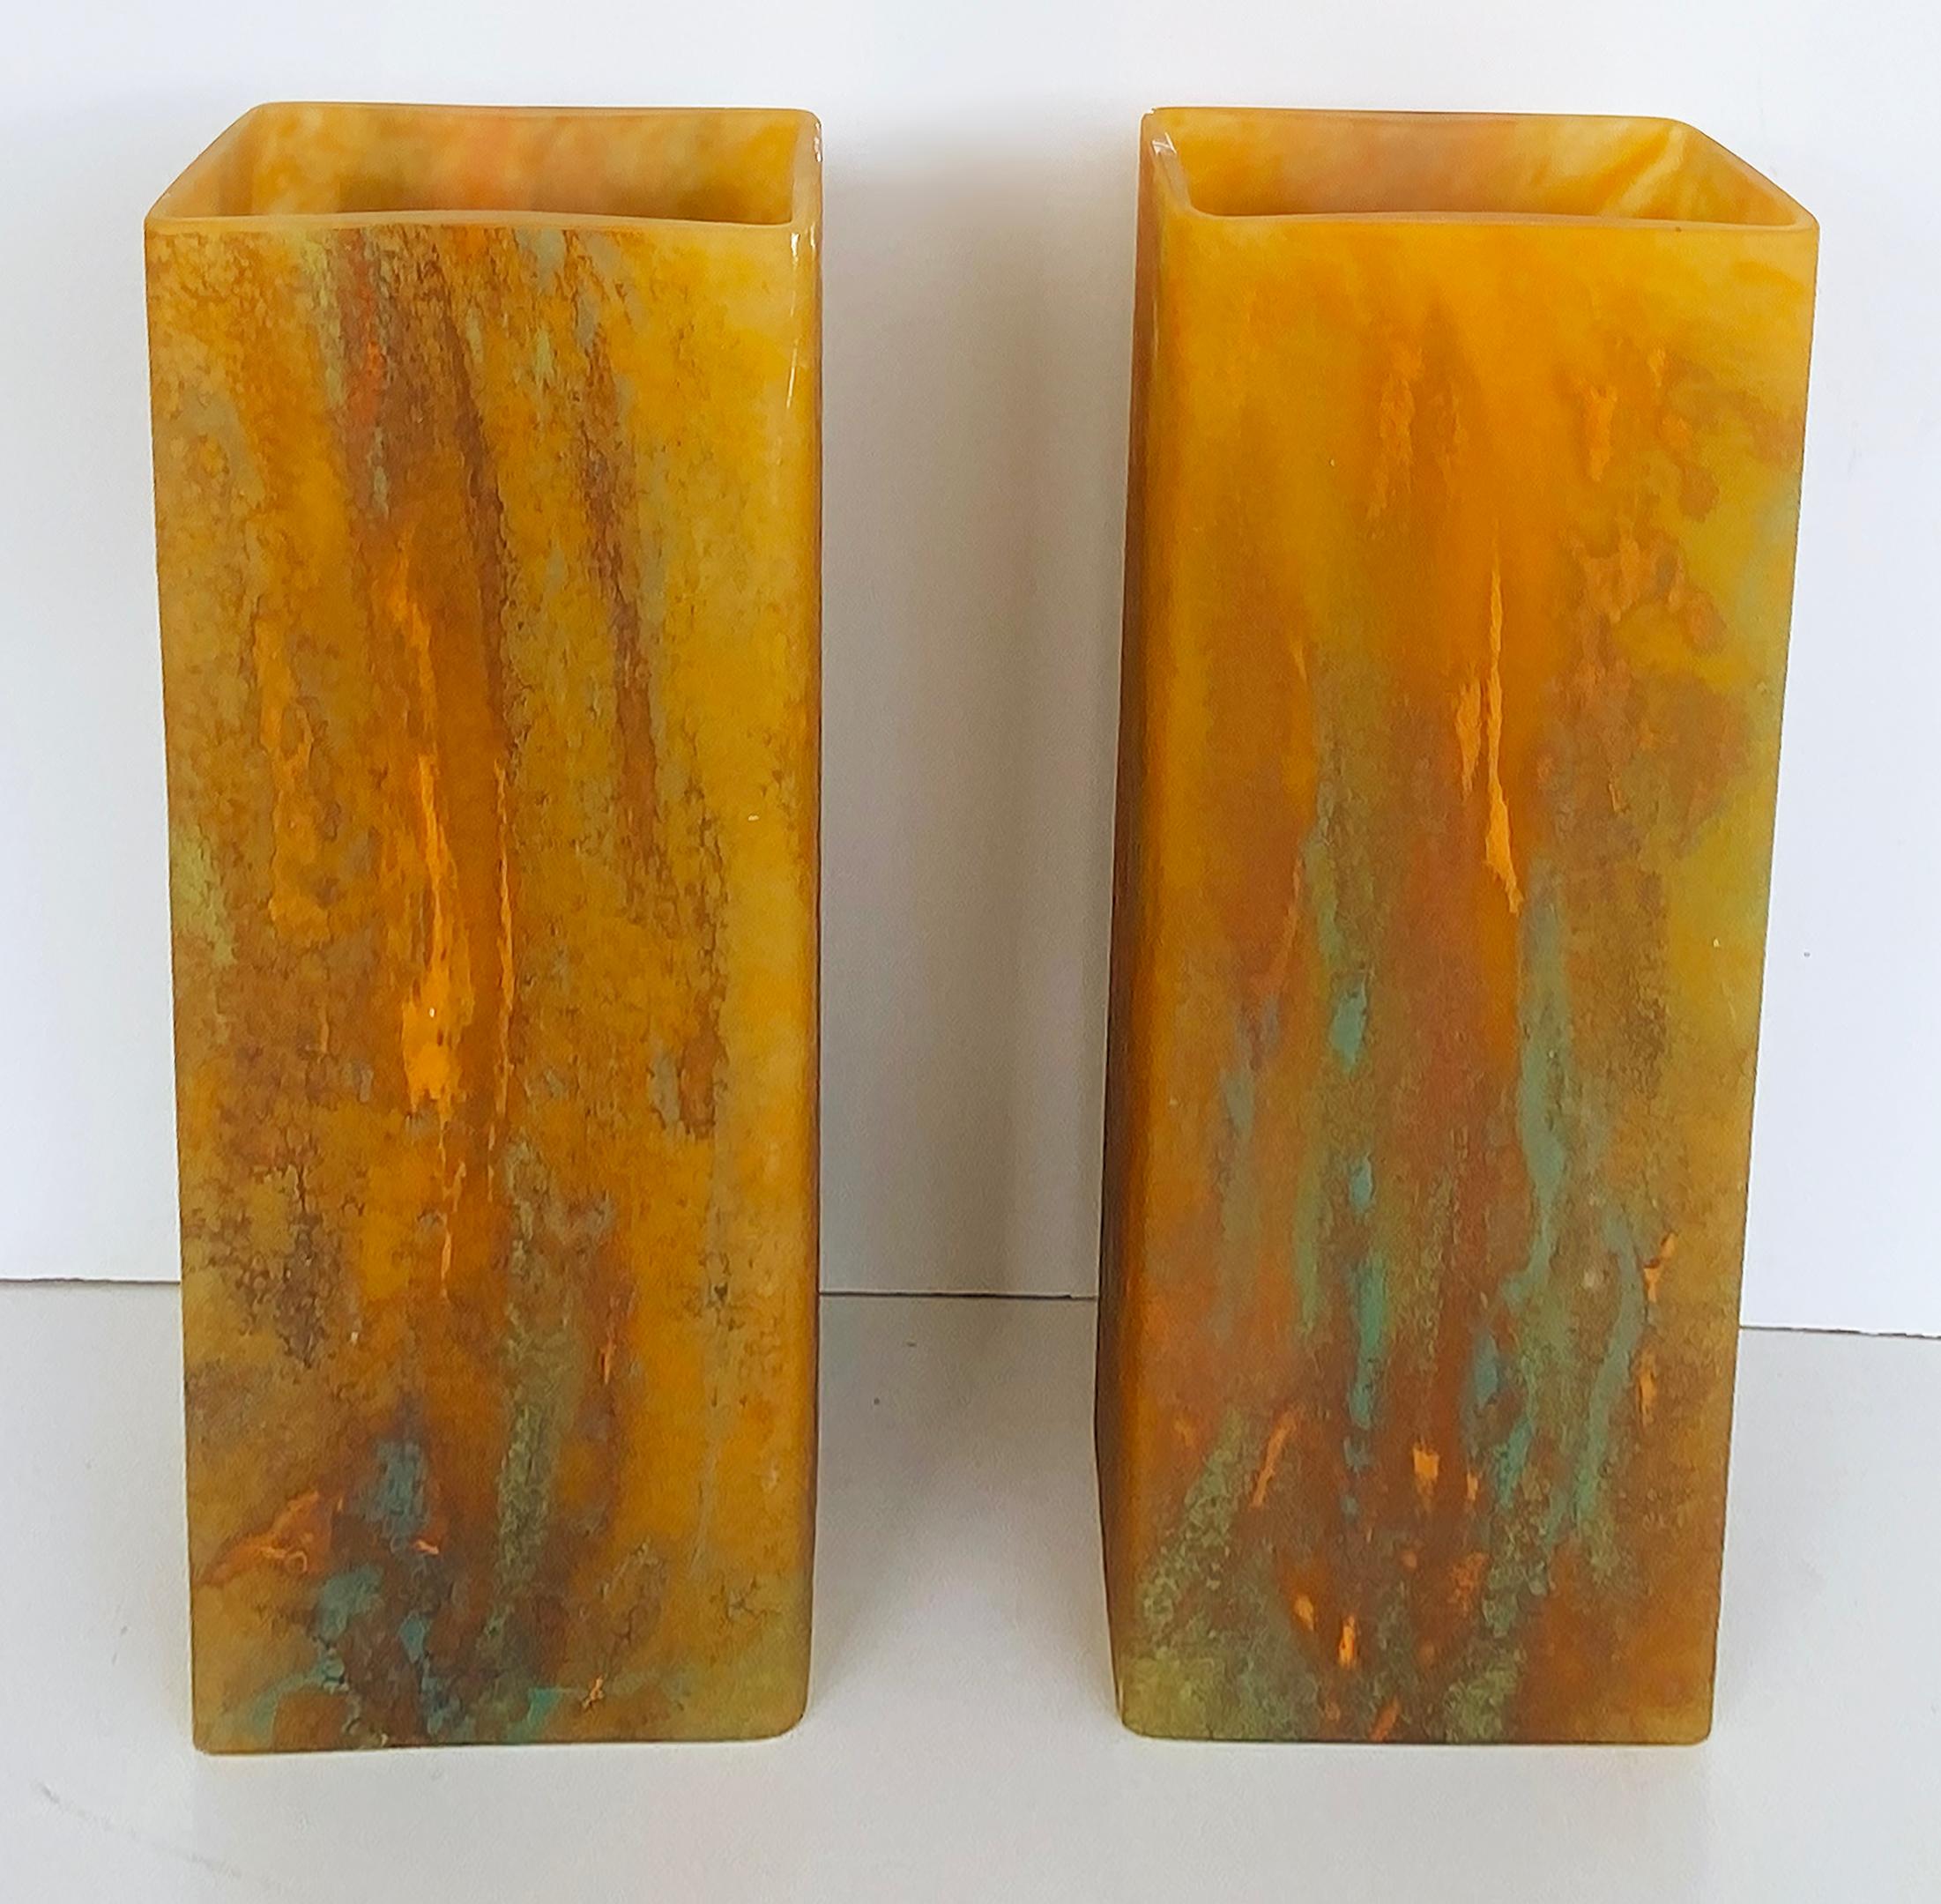 Vintage Pair of Art Glass Wall Washing Sconces with Mounting Brackets

Offered for sale is a pair of hand-blown art-glass molded shade wall sconces. The sconces give a warm glow and wash the wall above with a soft light through the open end of the